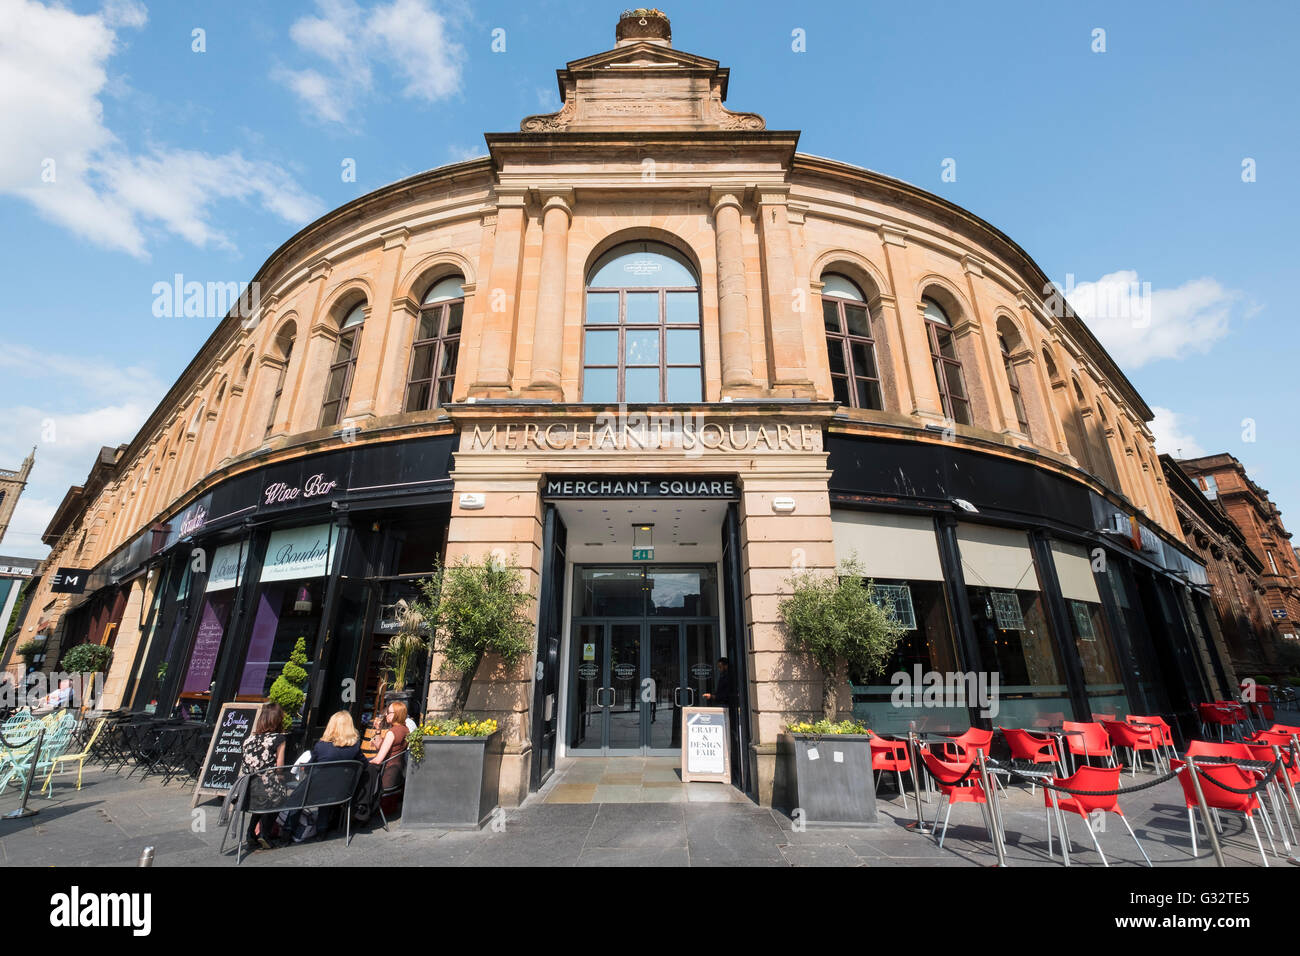 Exterior of Merchant Square building containing restaurant and bars in Merchant City district of Glasgow, Scotland, united Kingd Stock Photo